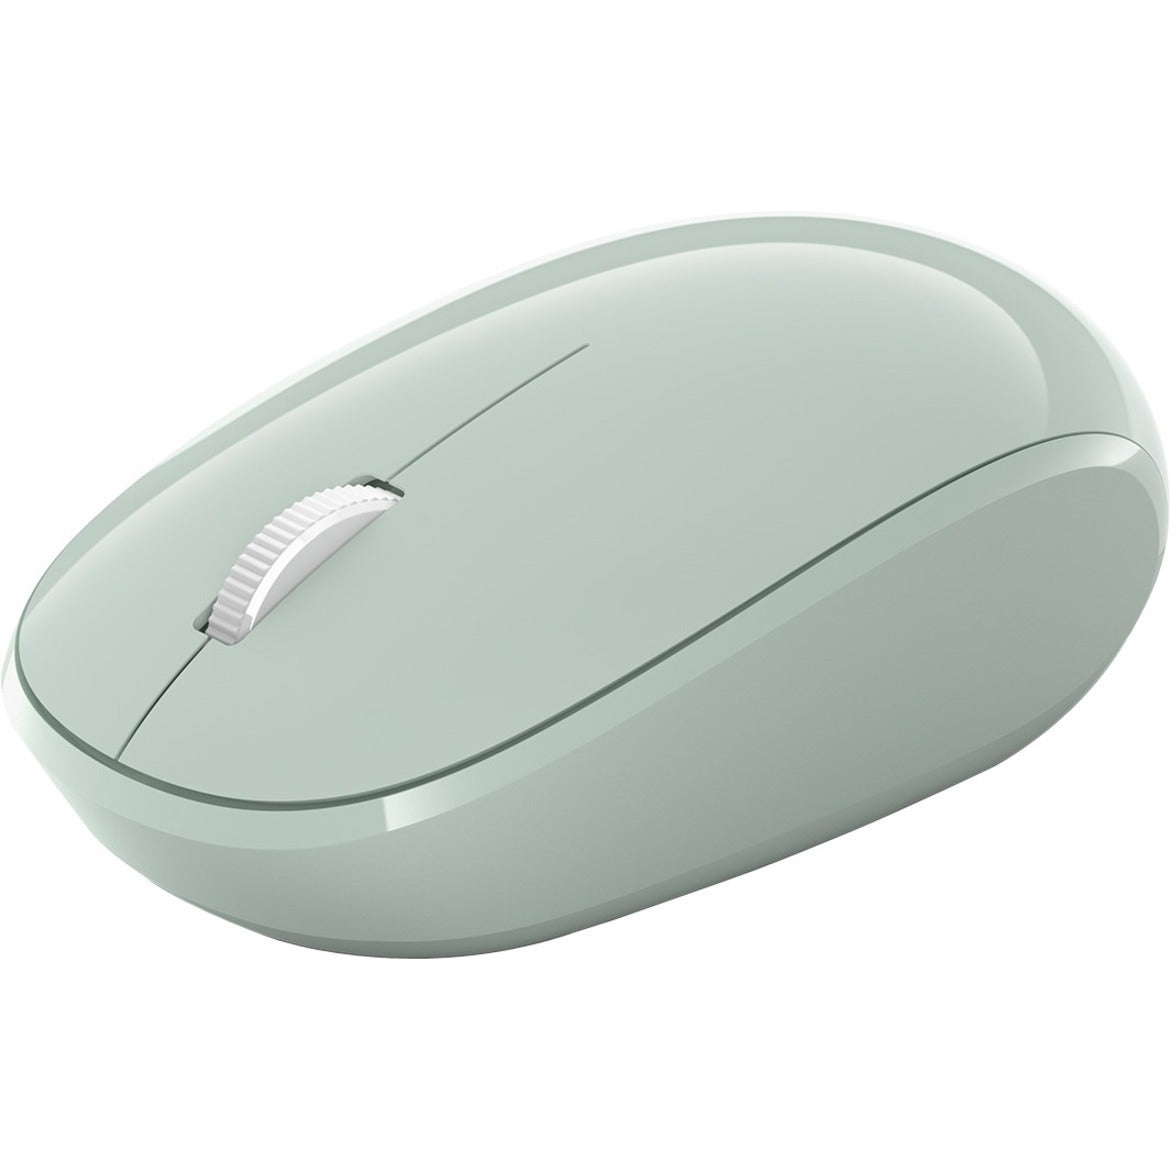 Microsoft RJN-00025 Bluetooth Mouse, Wireless 2.4 GHz, Scroll Wheel, 4 Buttons, Mint Color